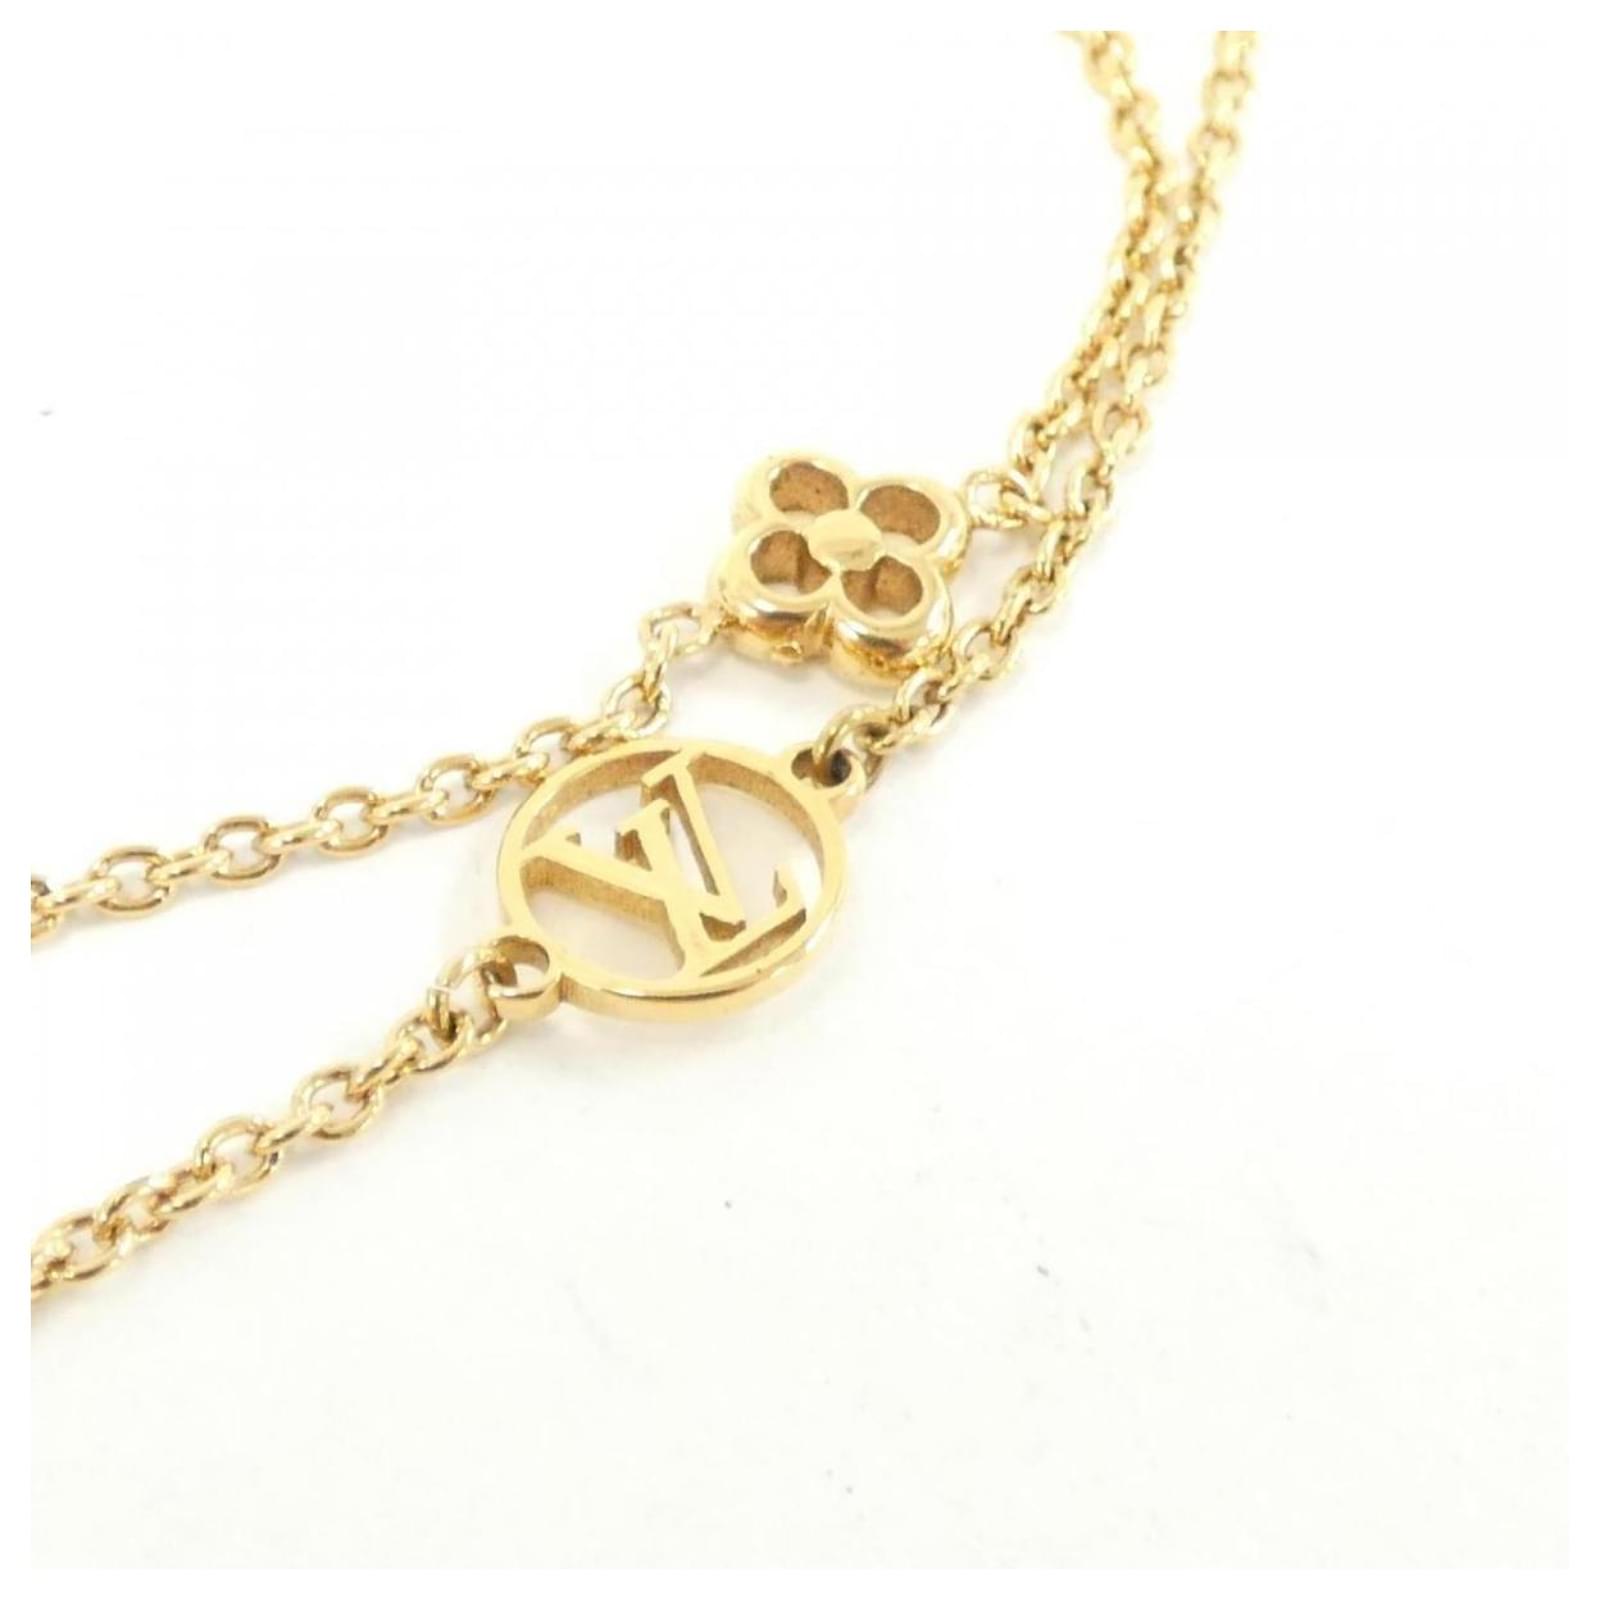 LOUIS VUITTON Flower Full Necklace Gold M68125 Accessory 90178195